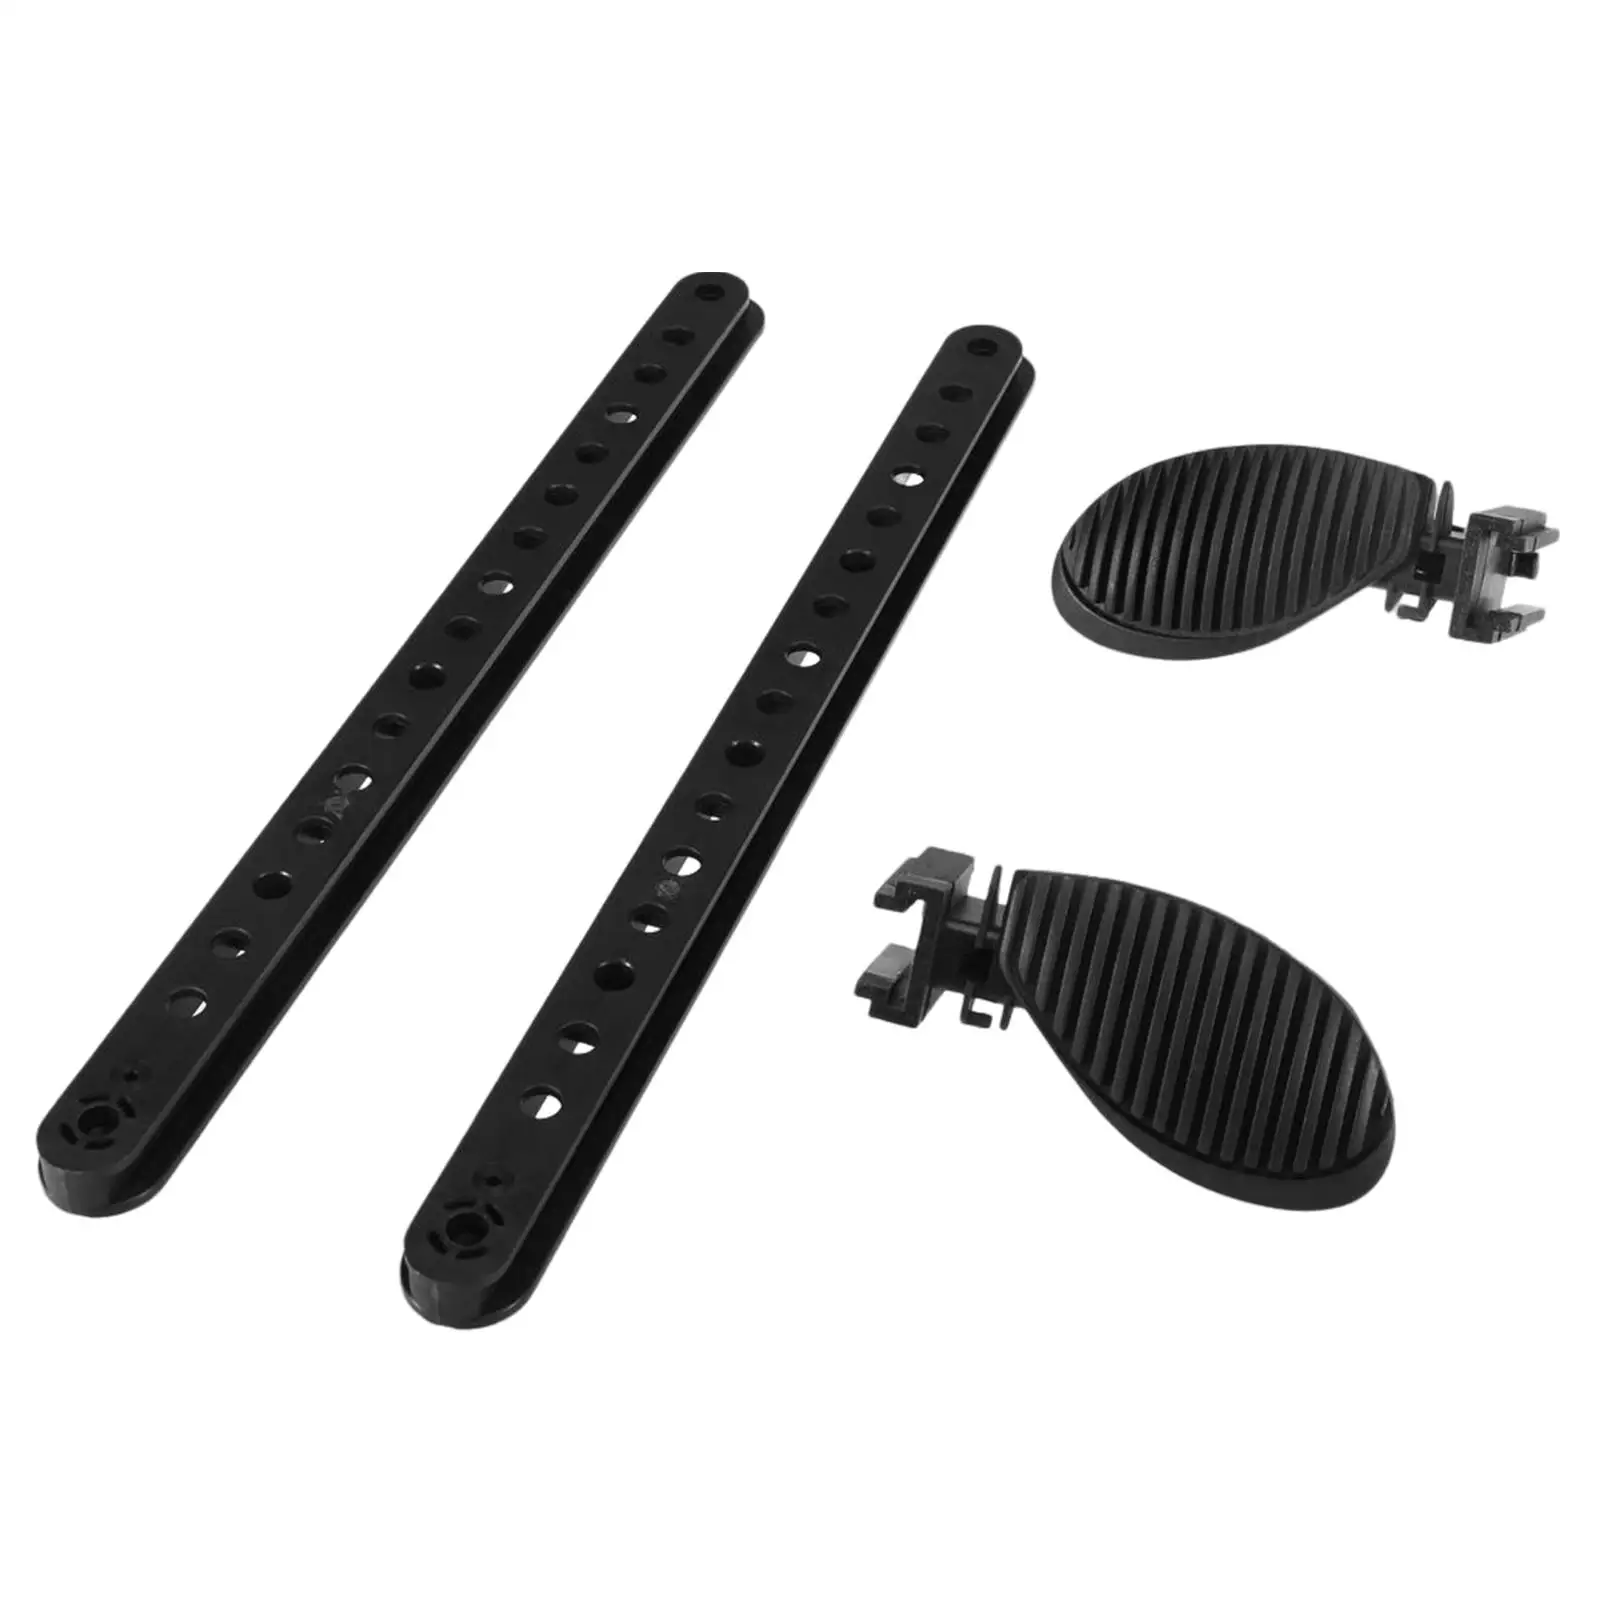 2x Kayak Foot Pegs Foot Portable Footboard Pedal for Canoe